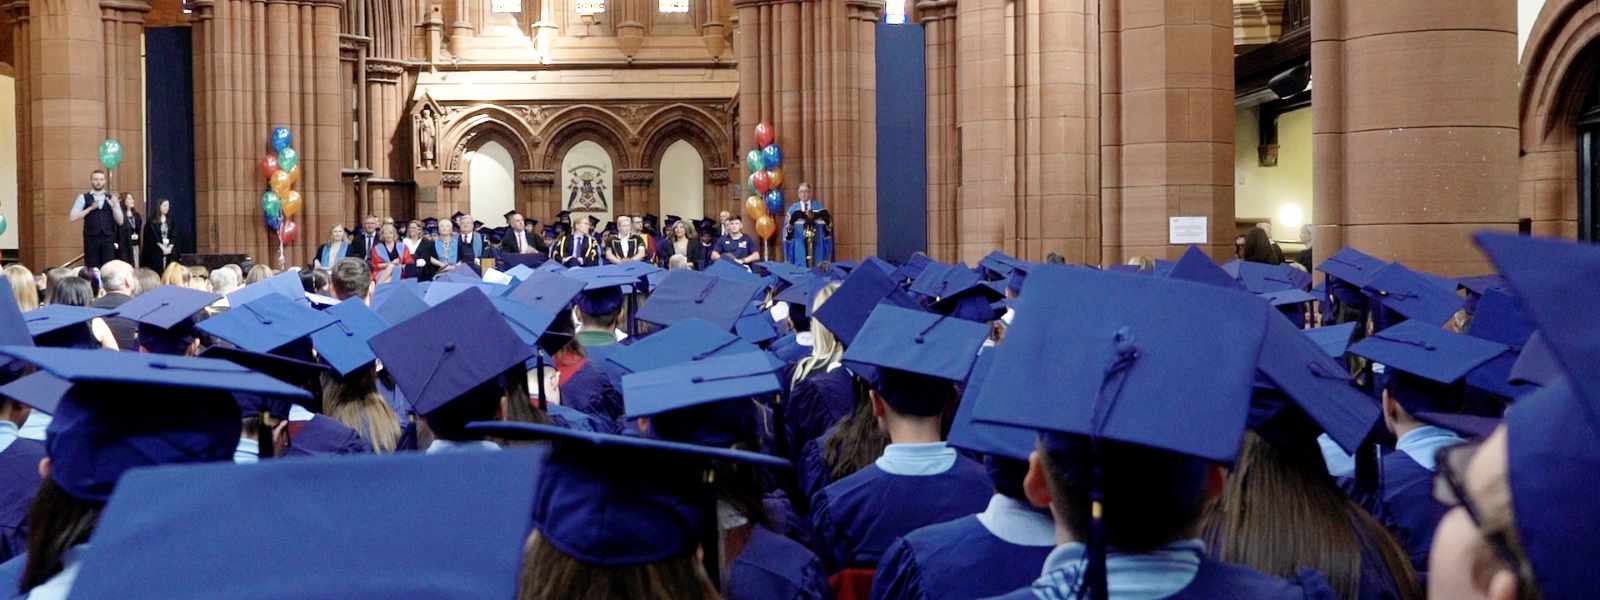 Pupils dressed in blue gowns and mortarboards sit in the Barony Hall facing the stage.